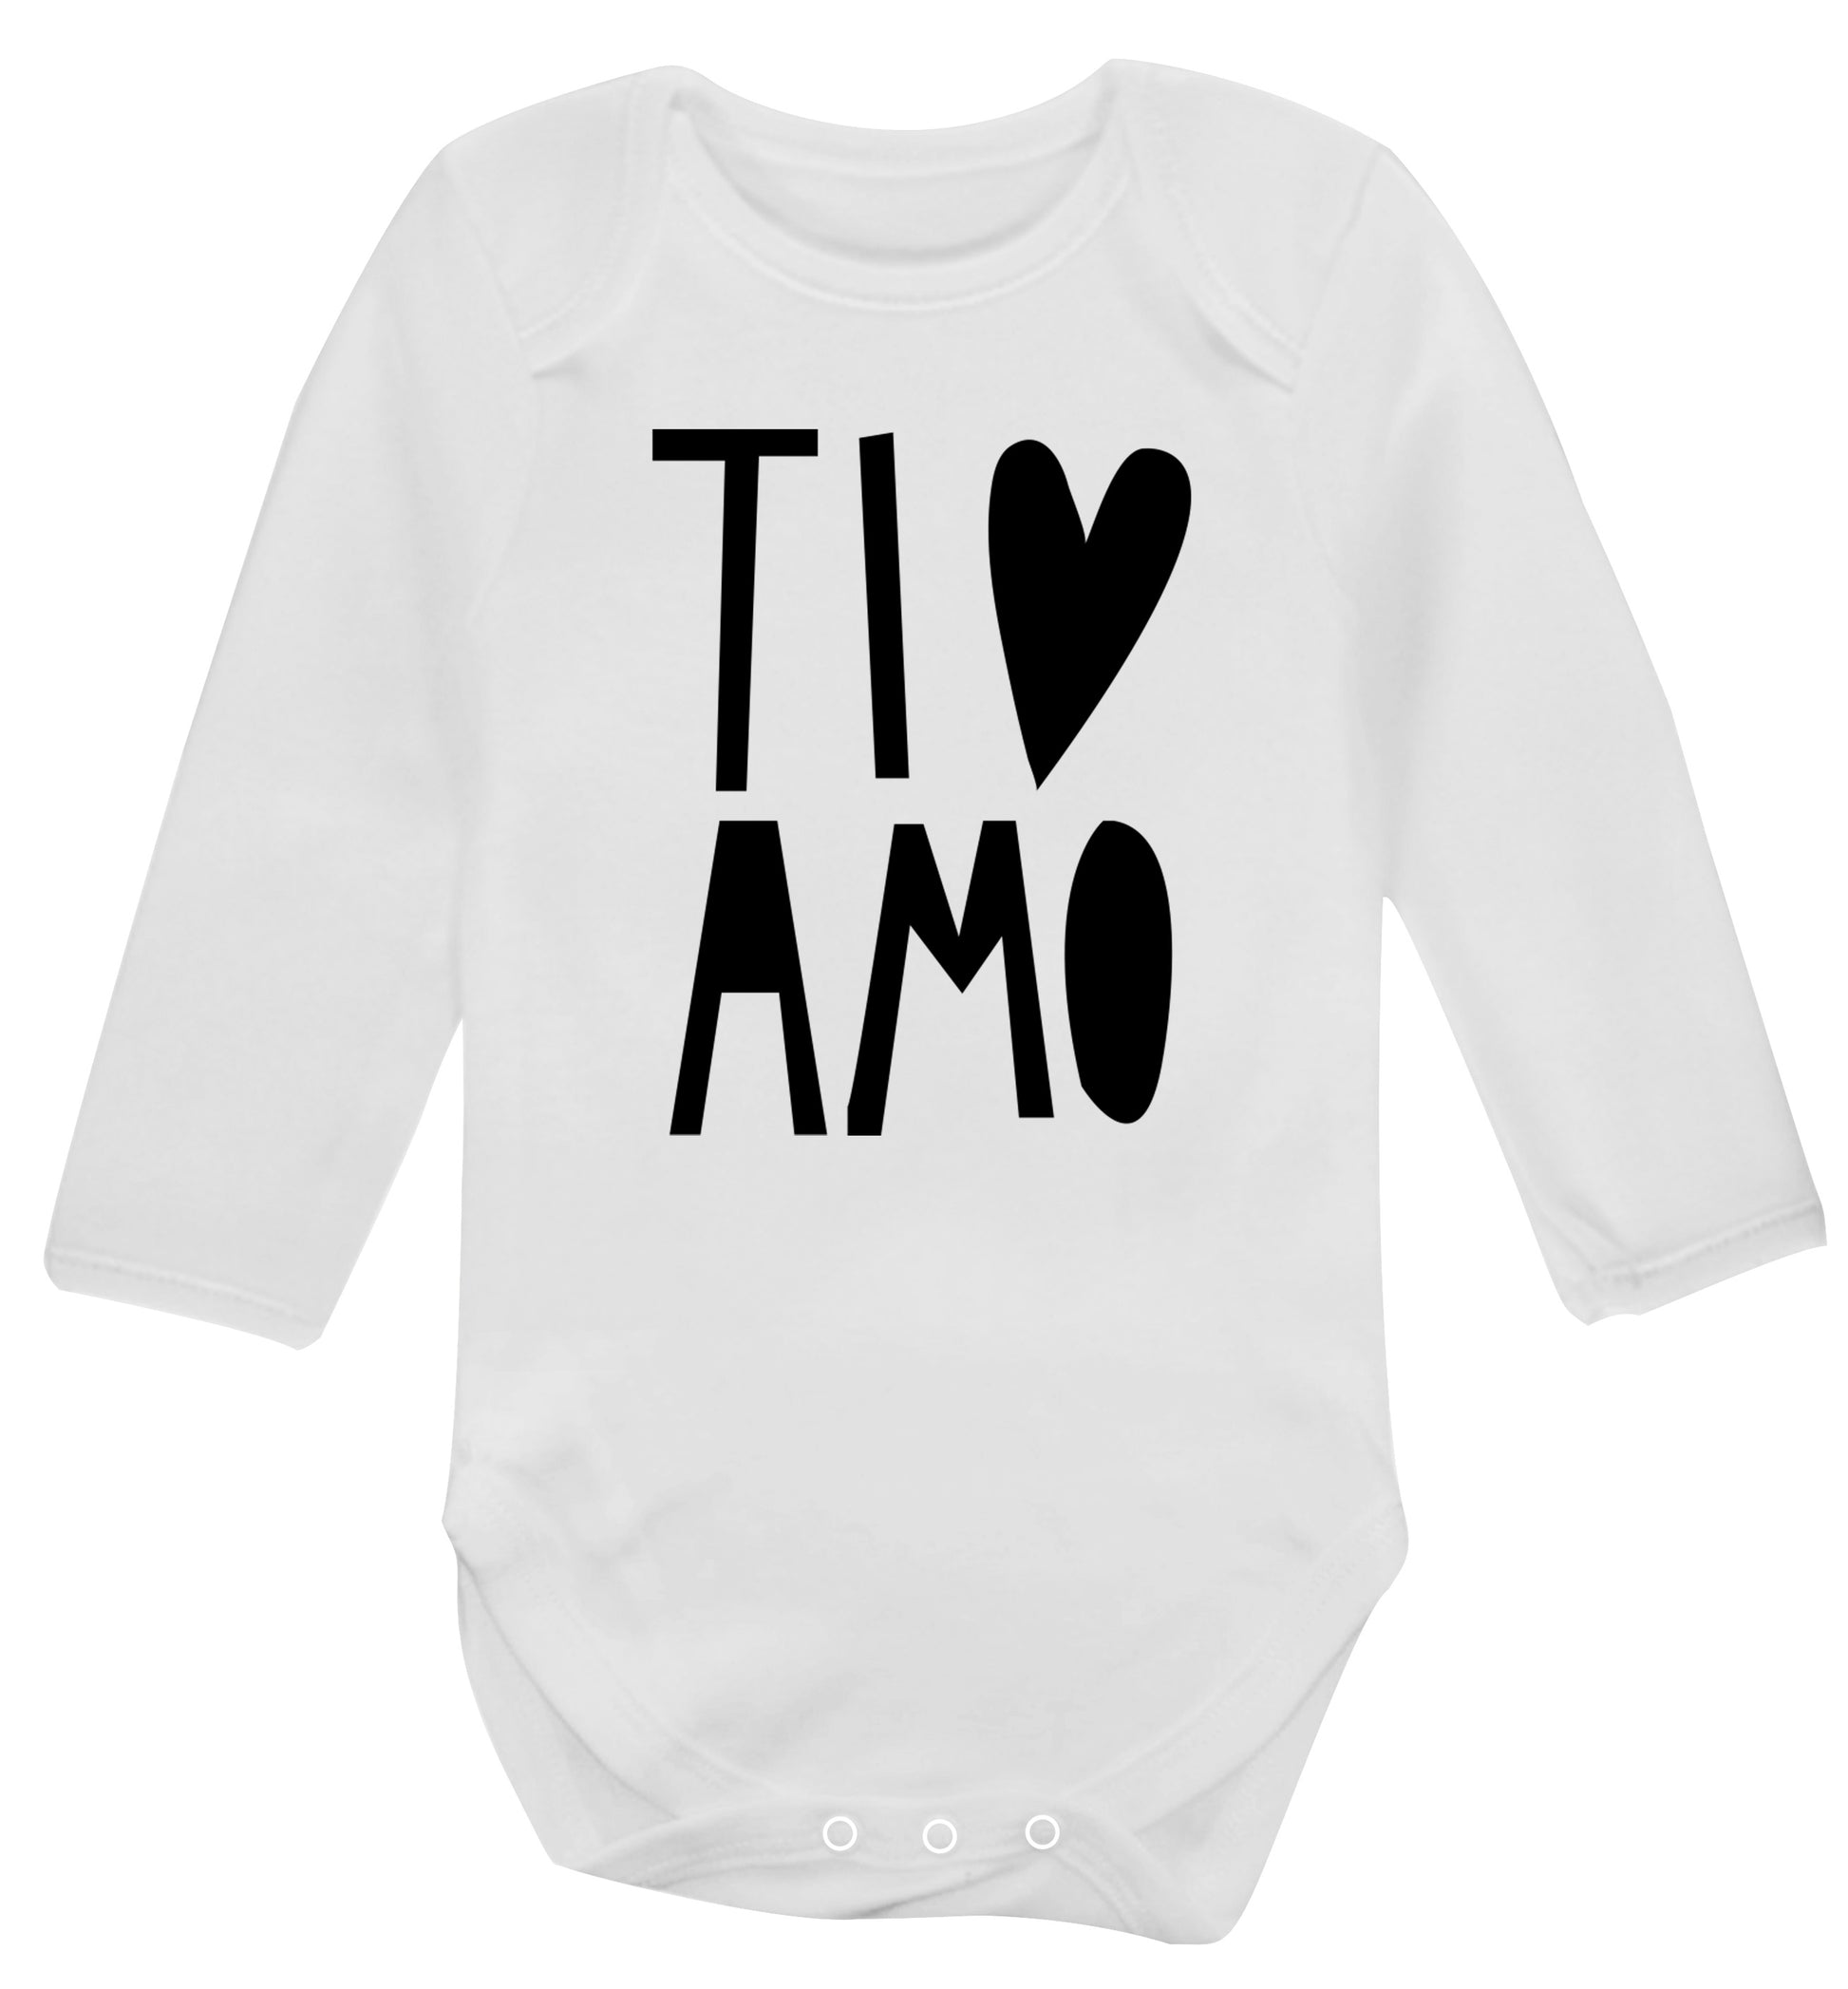 Ti amo - I love you Baby Vest long sleeved white 6-12 months